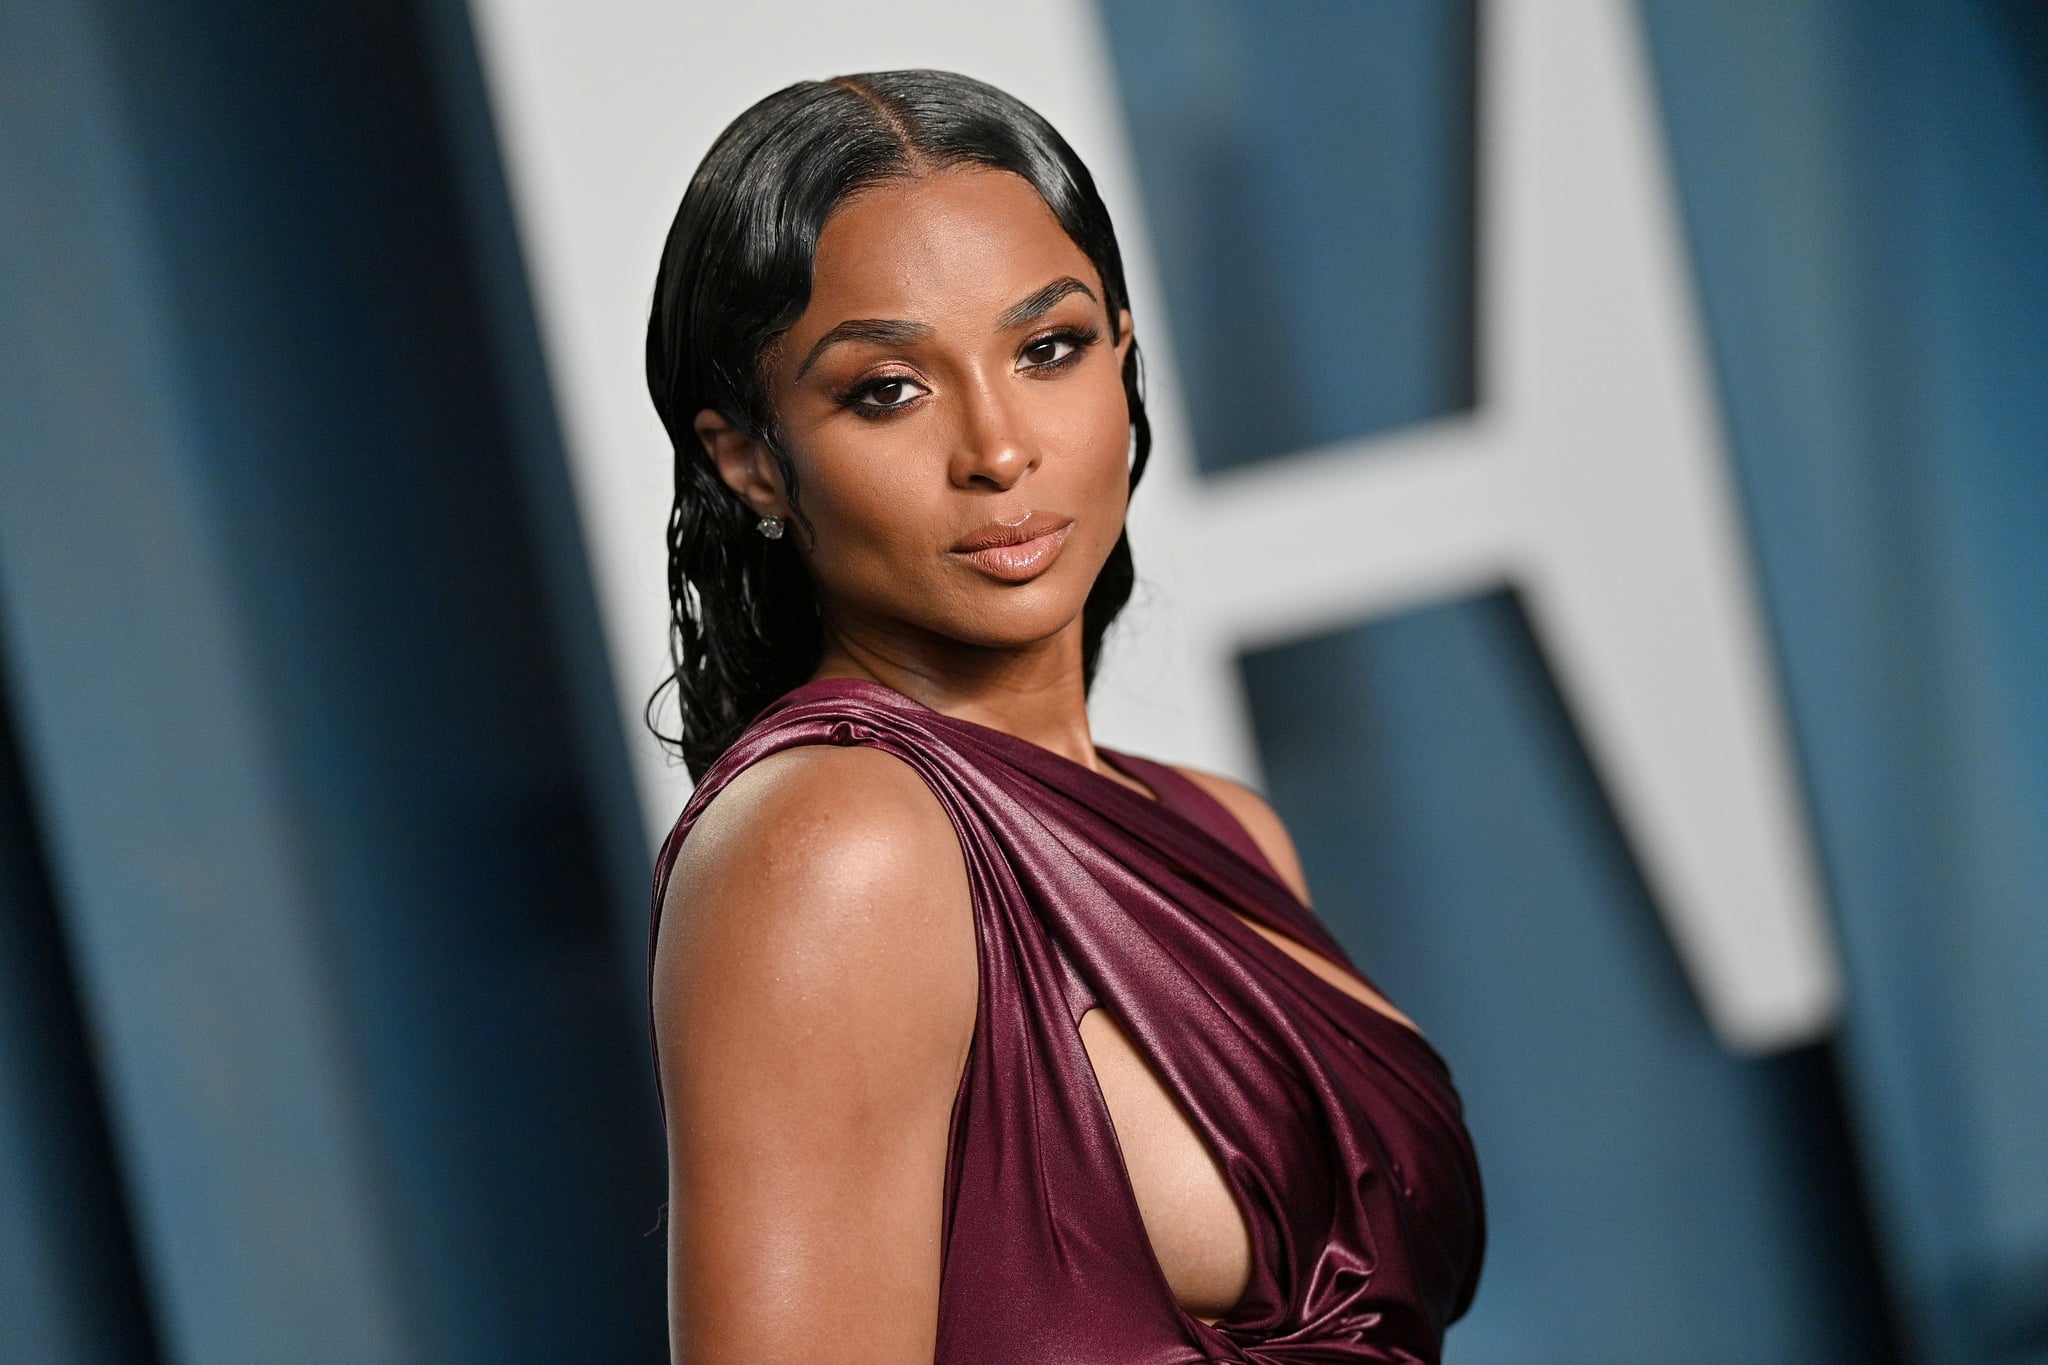 BEVERLY HILLS, CALIFORNIA - MARCH 27: Ciara attends the 2022 Vanity Fair Oscar Party hosted by Radhika Jones at Wallis Annenberg Centre for the Performing Arts on March 27, 2022 in Beverly Hills, California. (Photo by Lionel Hahn/Getty Images)